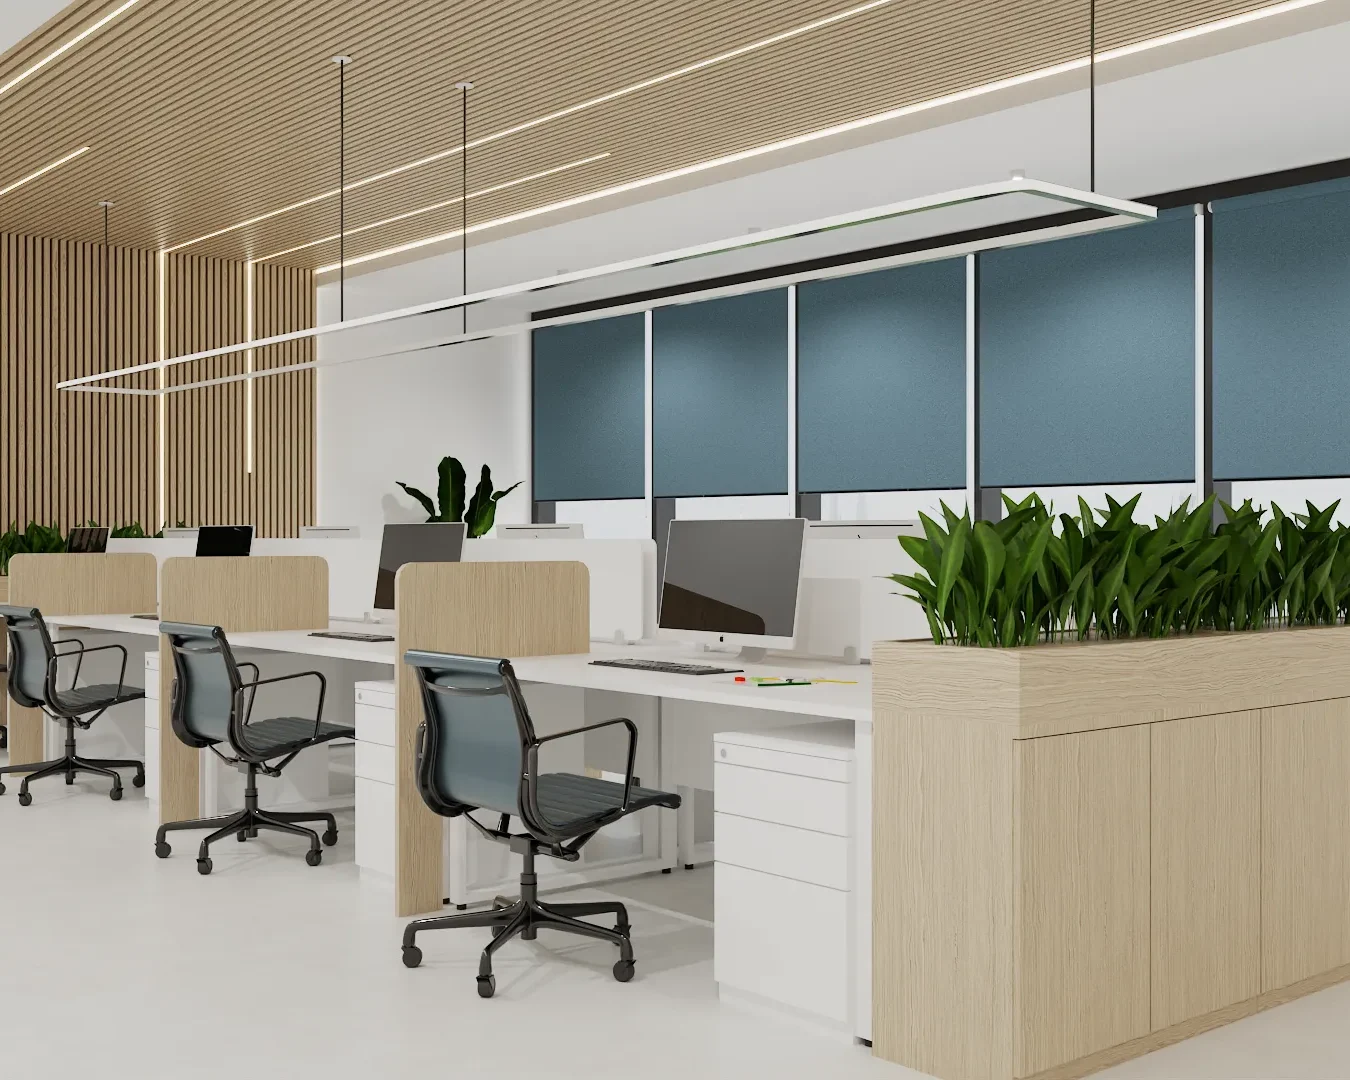 A modern office space with workstations, ergonomic chairs, and plenty of indoor plants. The design features natural wood accents and a clean, organized layout. Design by Debora, an online interior design service.